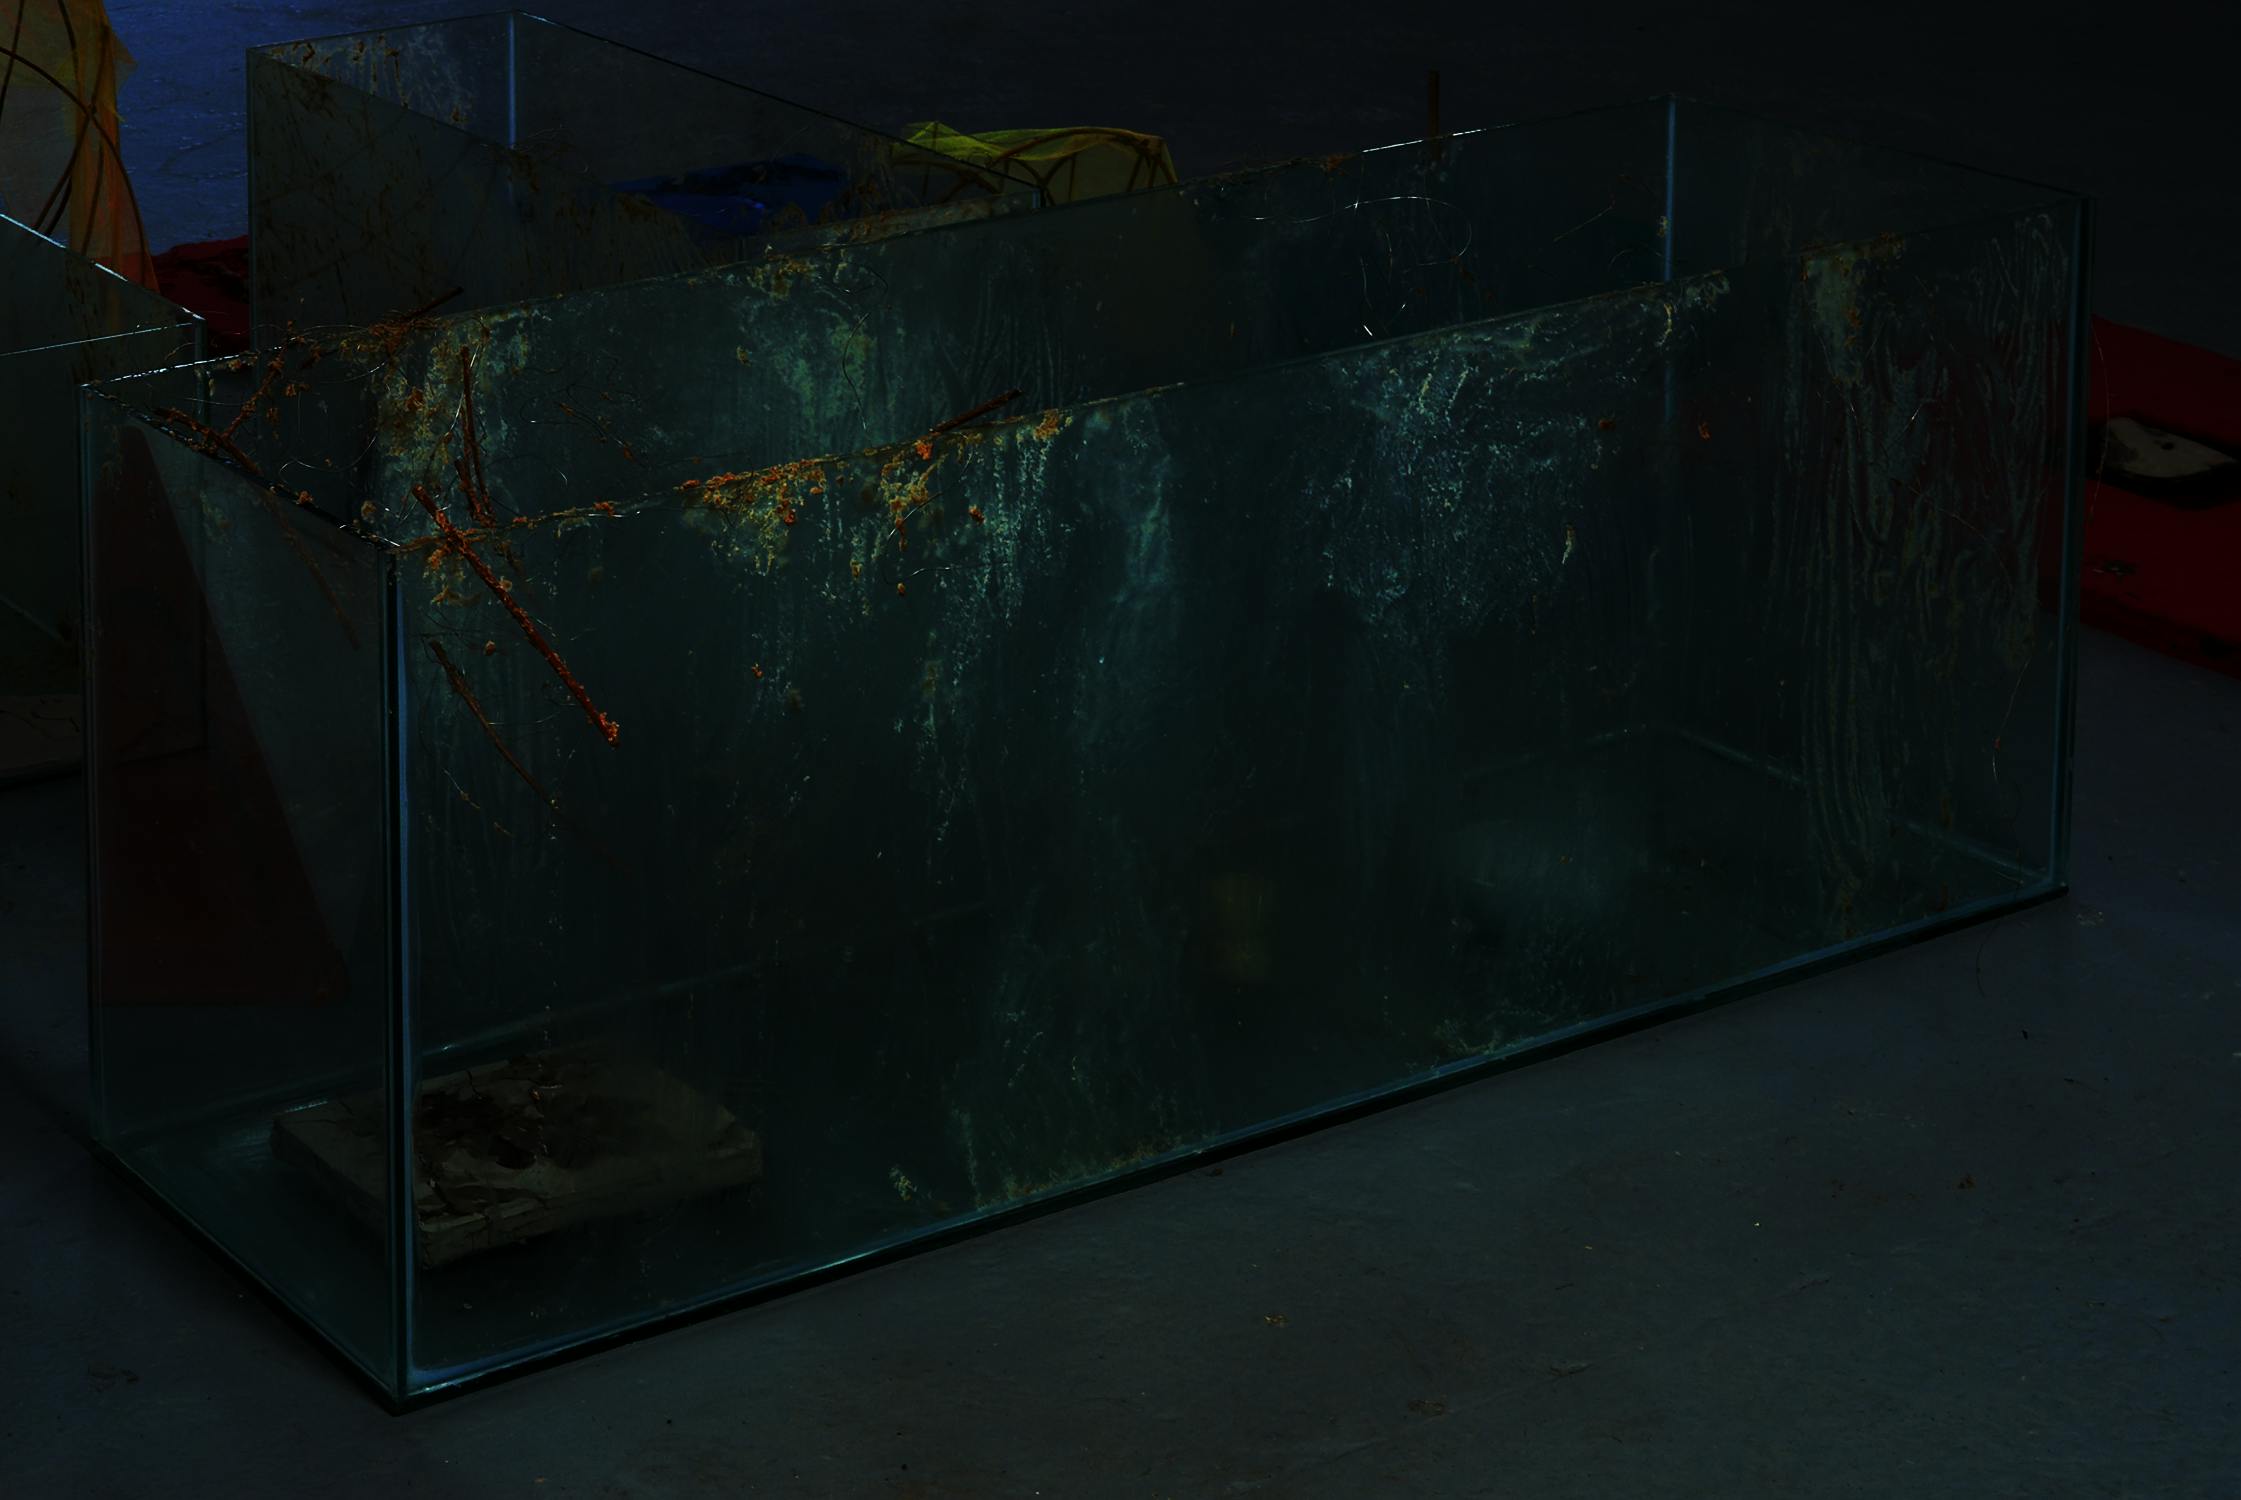 a large glass tank smeared with porridge. small twigs are stuck to the glass. a rectangular grey block sits inside the glass tank.